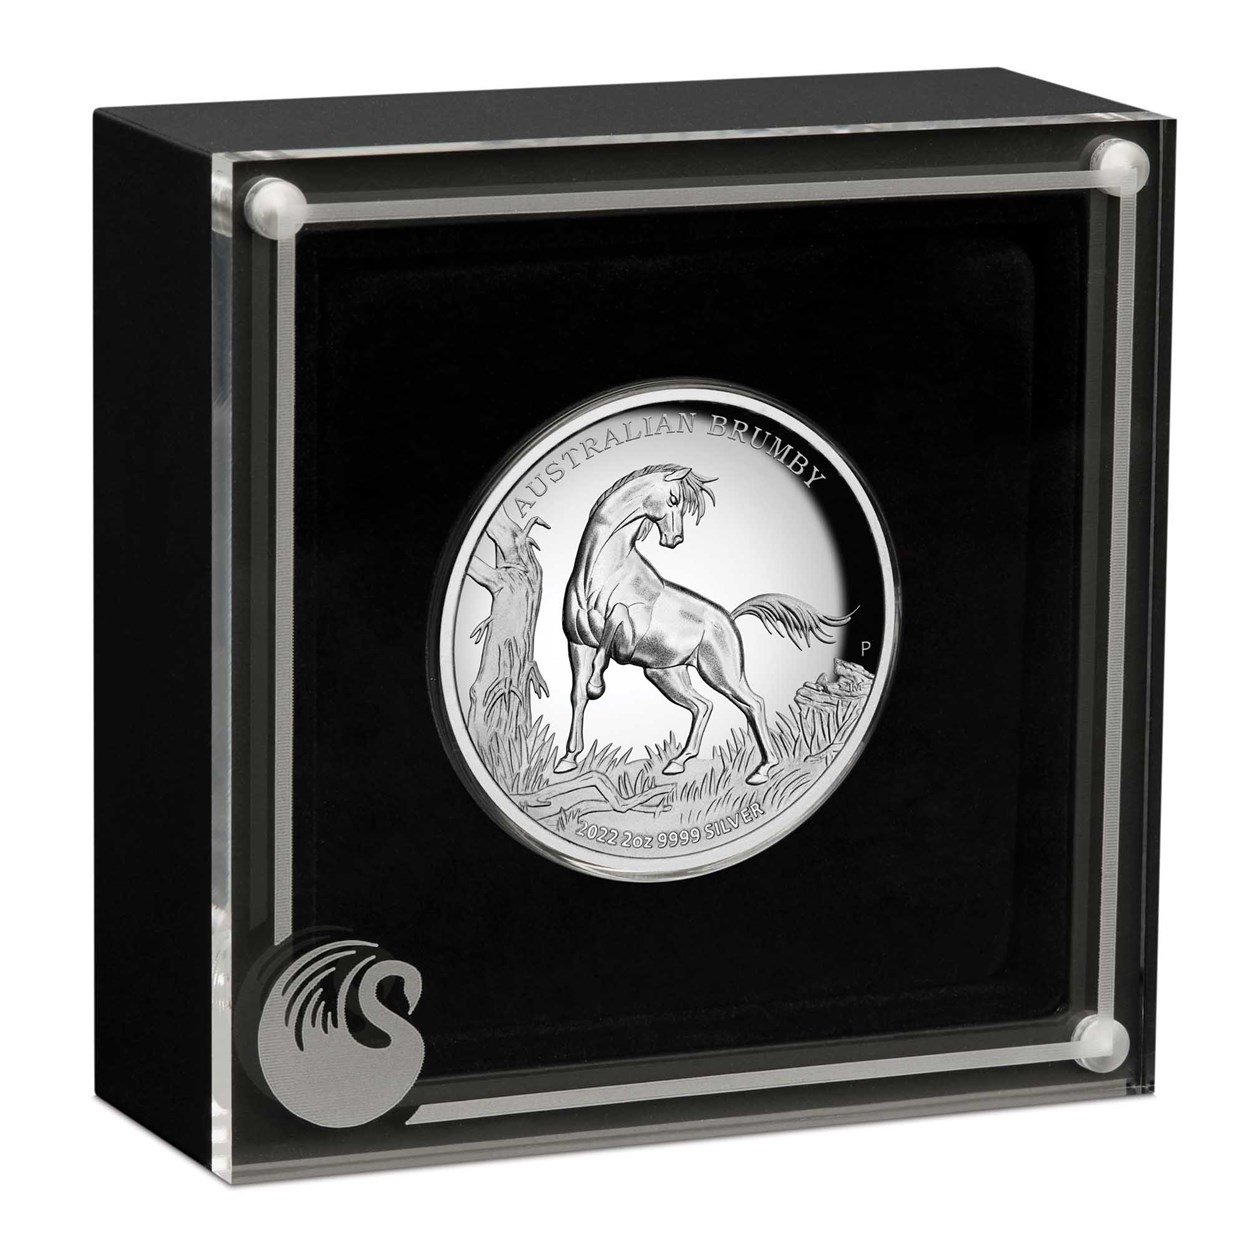 04 2022 AustralianBrumby 2oz Silver Proof HighRelief Coin InCase HighRes